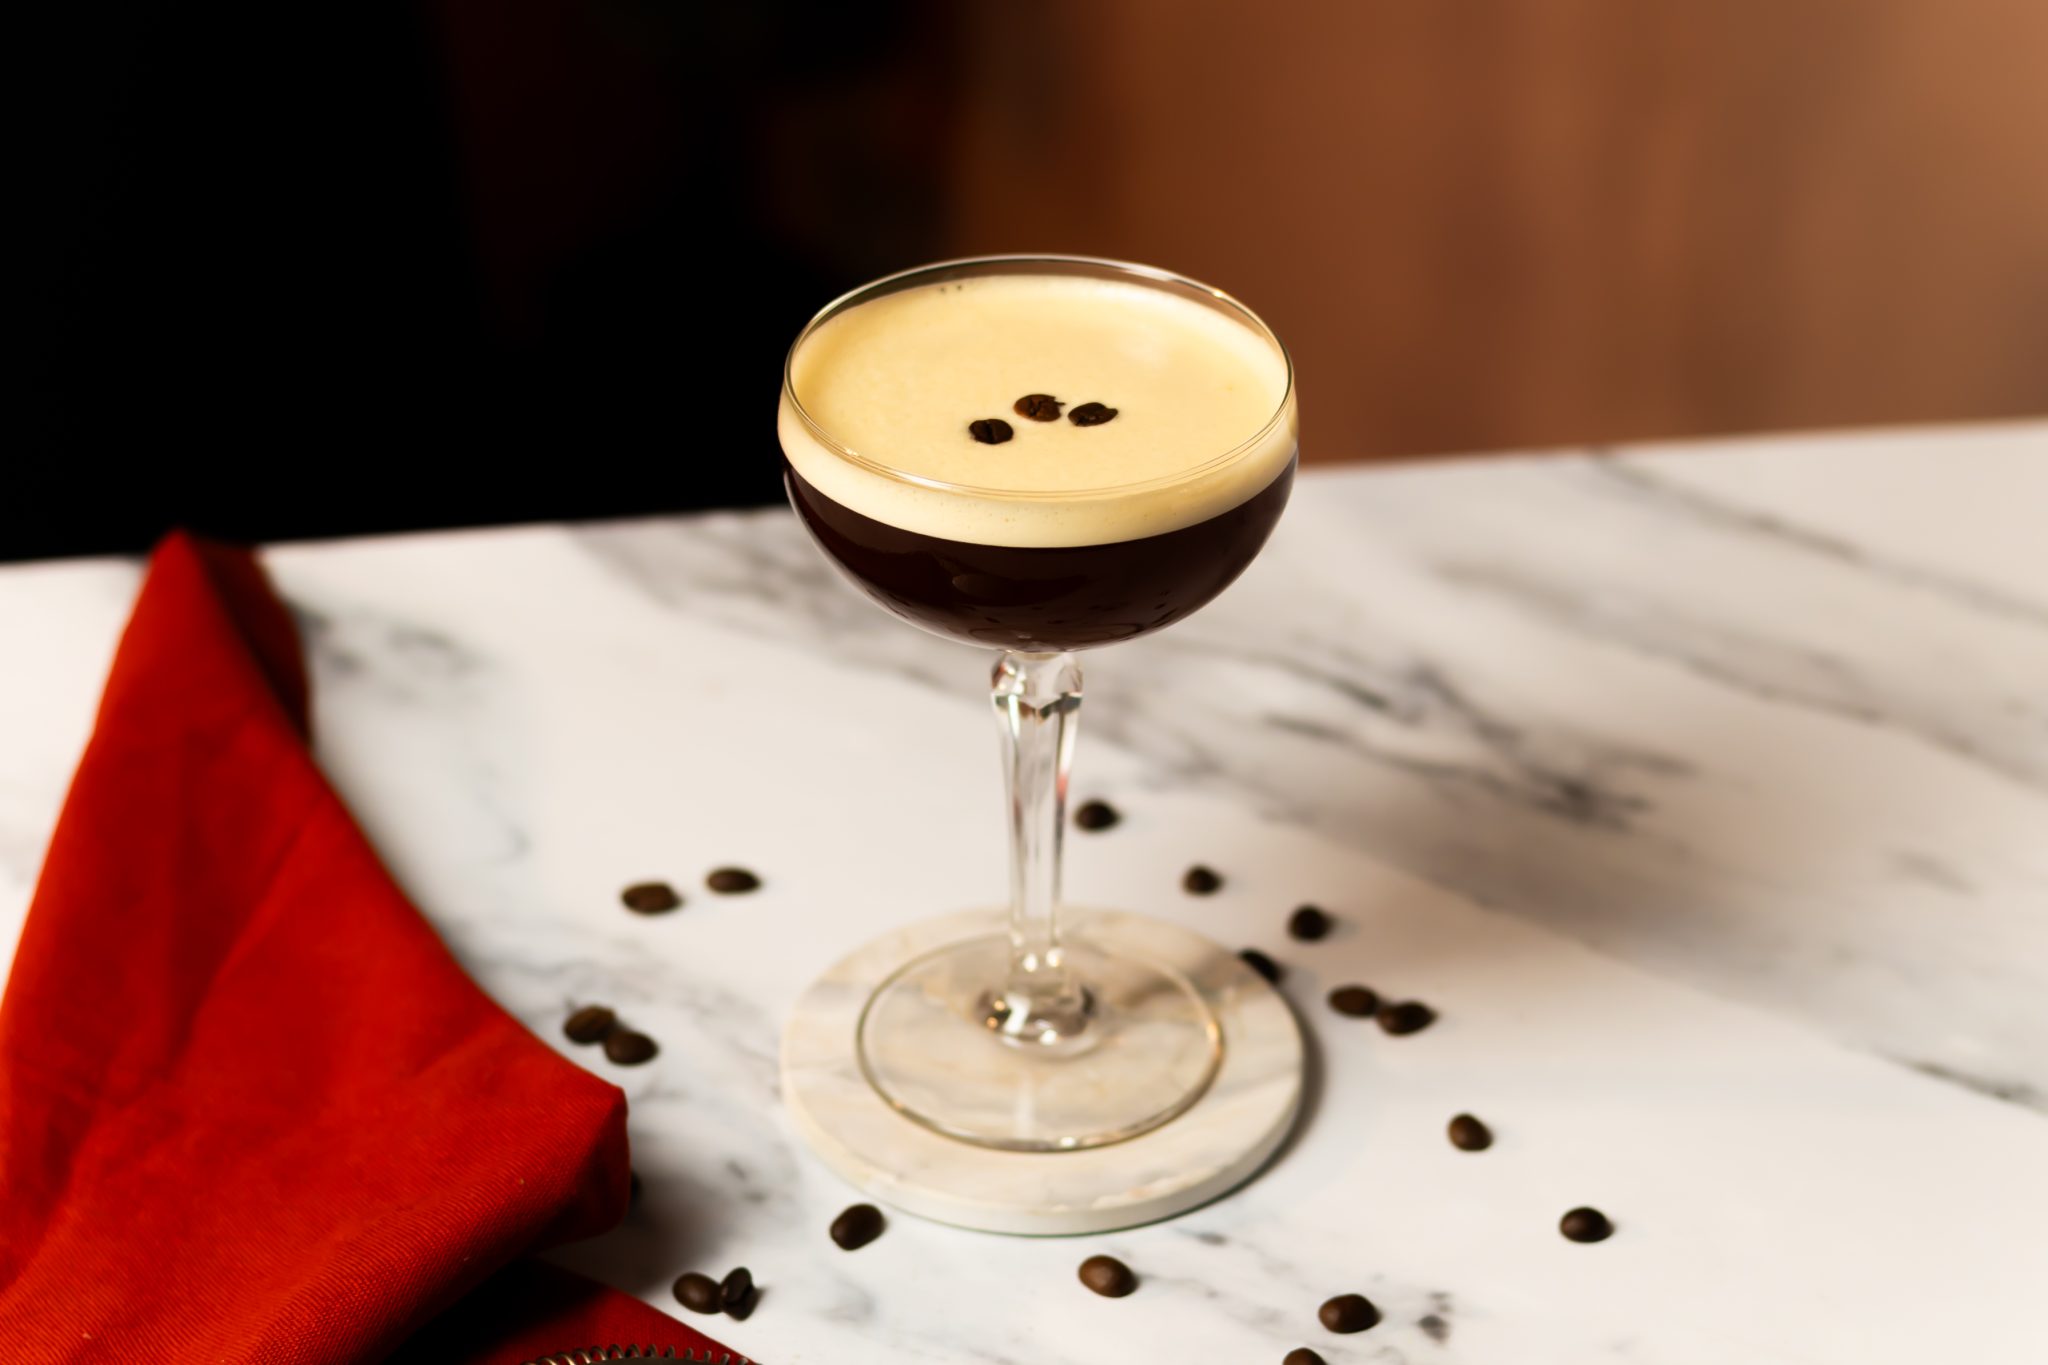 A side shot of a Mezcal Espresso Martini in a cocktail glass on a white coaster placed on a white marmol table surrounded by a red cloth and cofee beans.